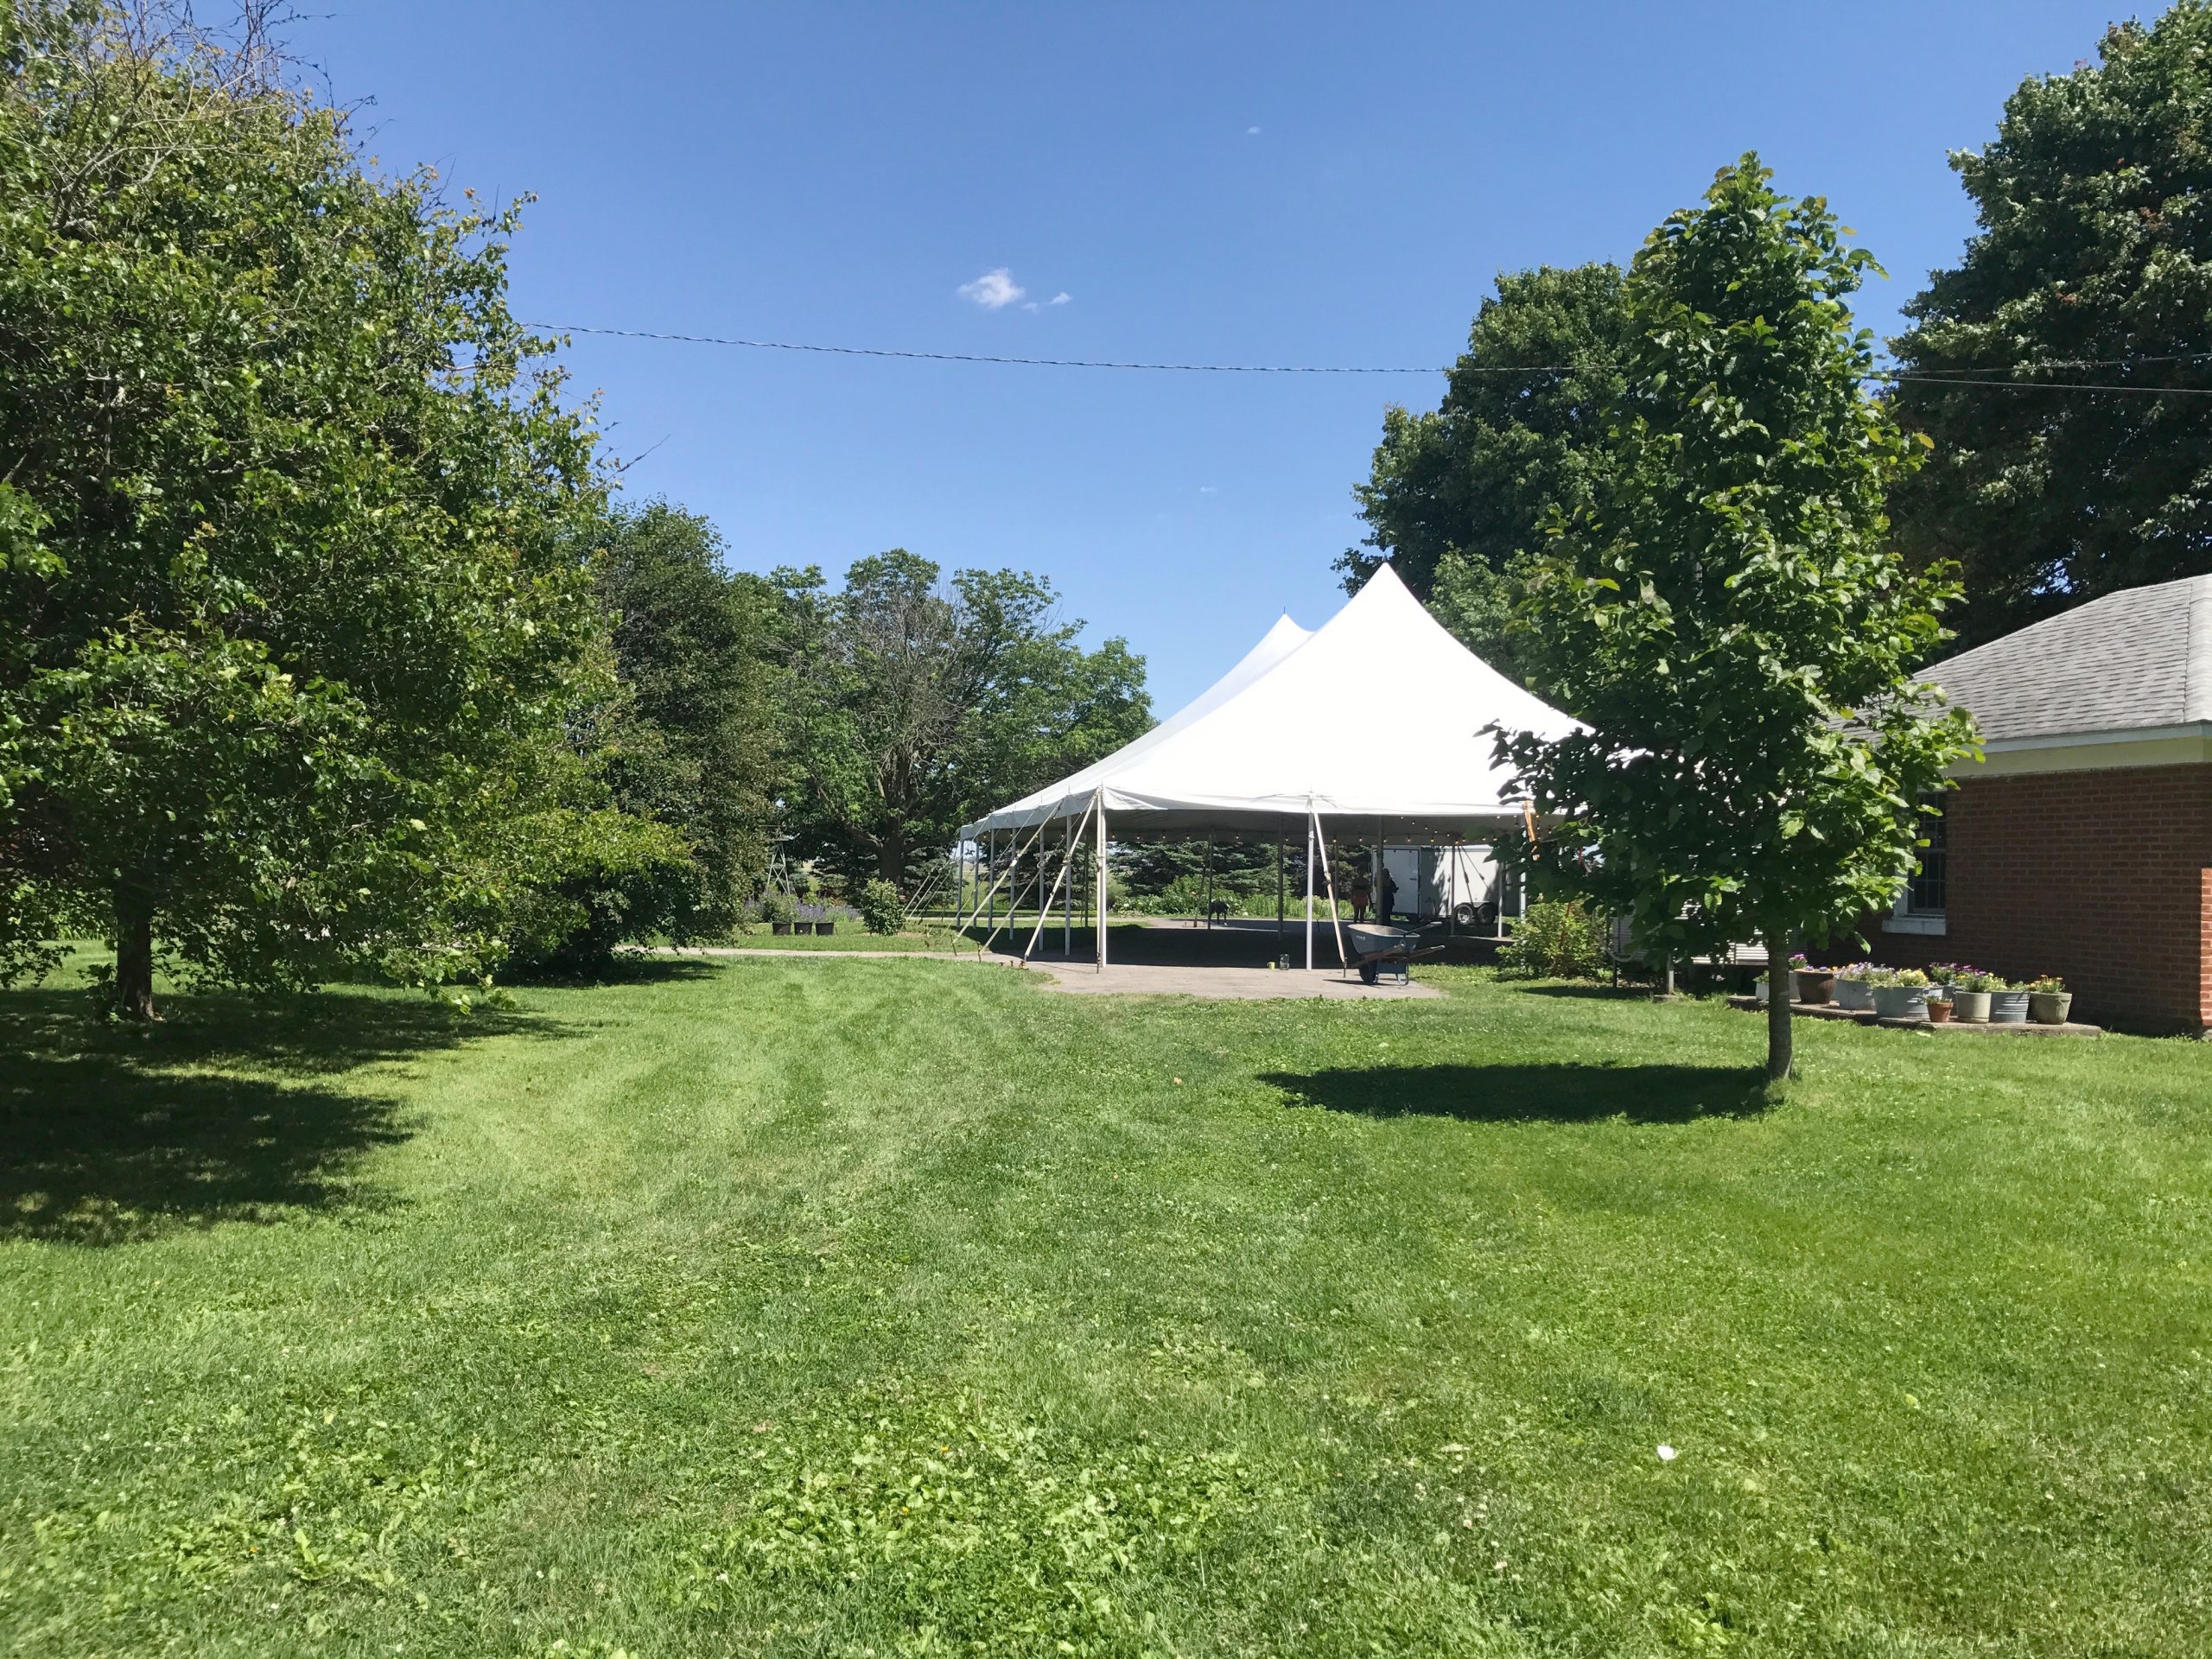 40' x 60' rope and pole tent in Walcott, IA